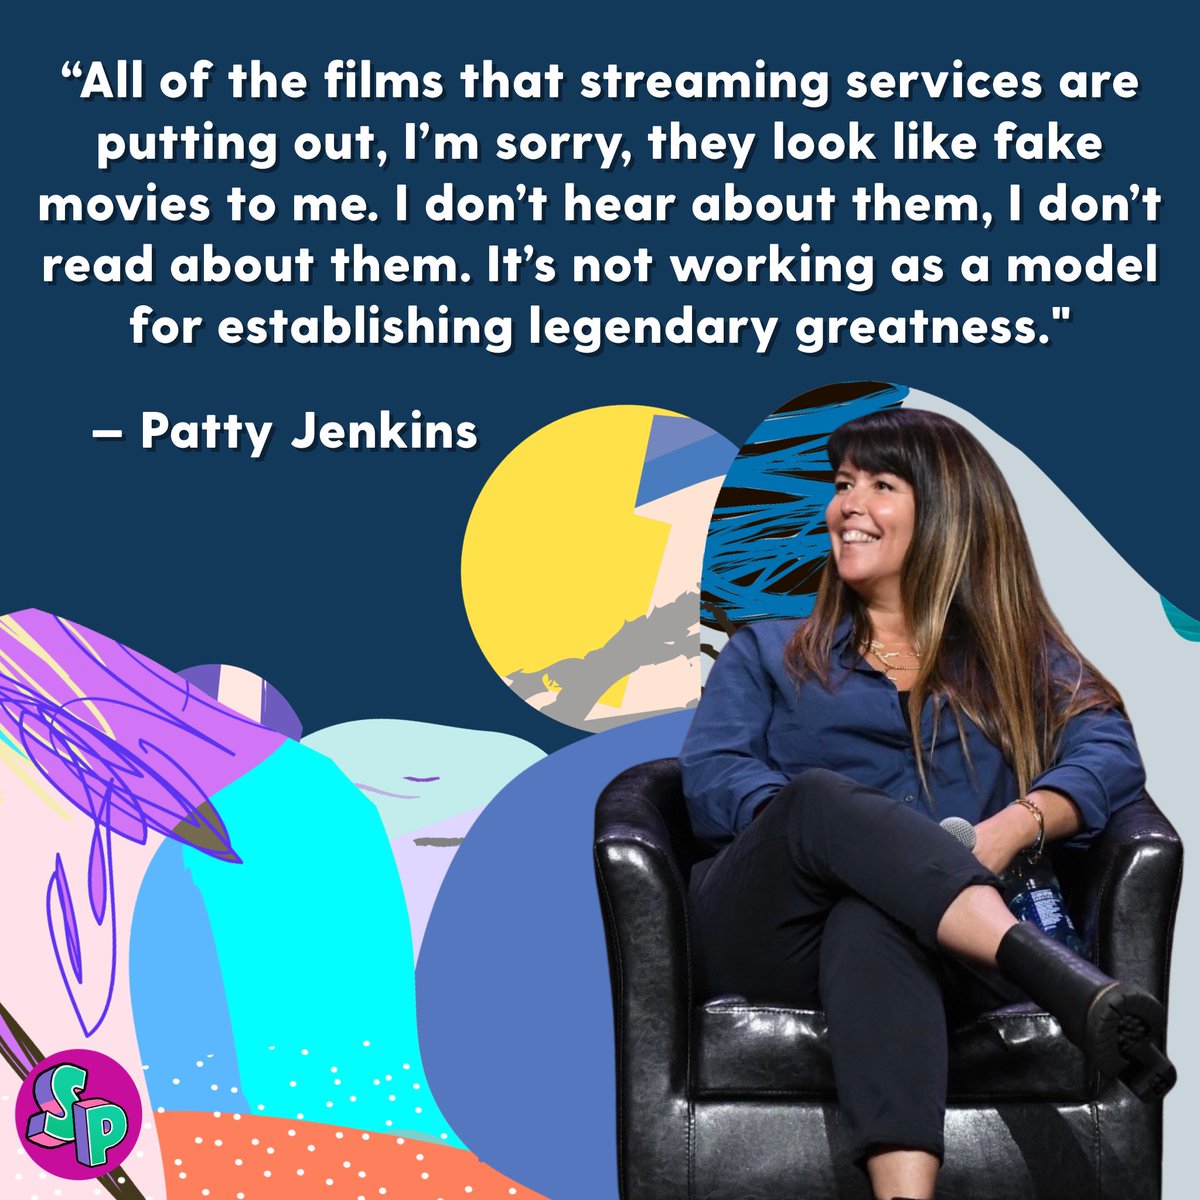 The director of Wonder Woman 1984, Patty Jenkins voices her opinion on straight-to-streaming movies.

https://t.co/XbD4wS0RGA https://t.co/WnBQhtzN89